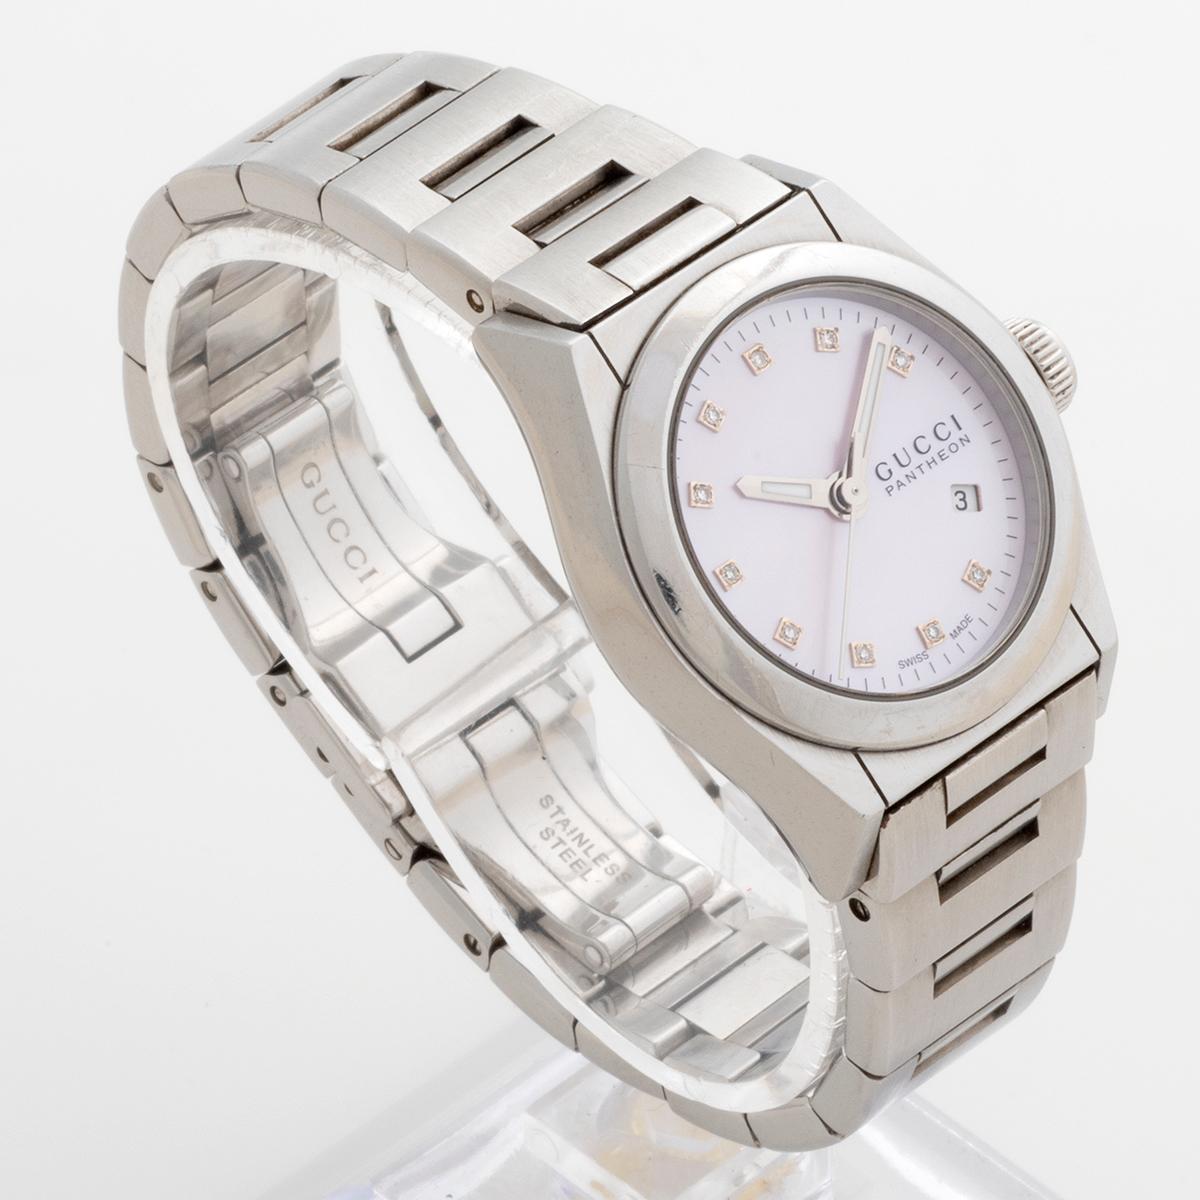 Our attractive ladies Gucci Pantheon reference 115.5 features a 25mm stainless steel case with stainless steel bracelet and mother of pearl dial factory set with ten diamonds. This example is presented in excellent condition with light signs of use